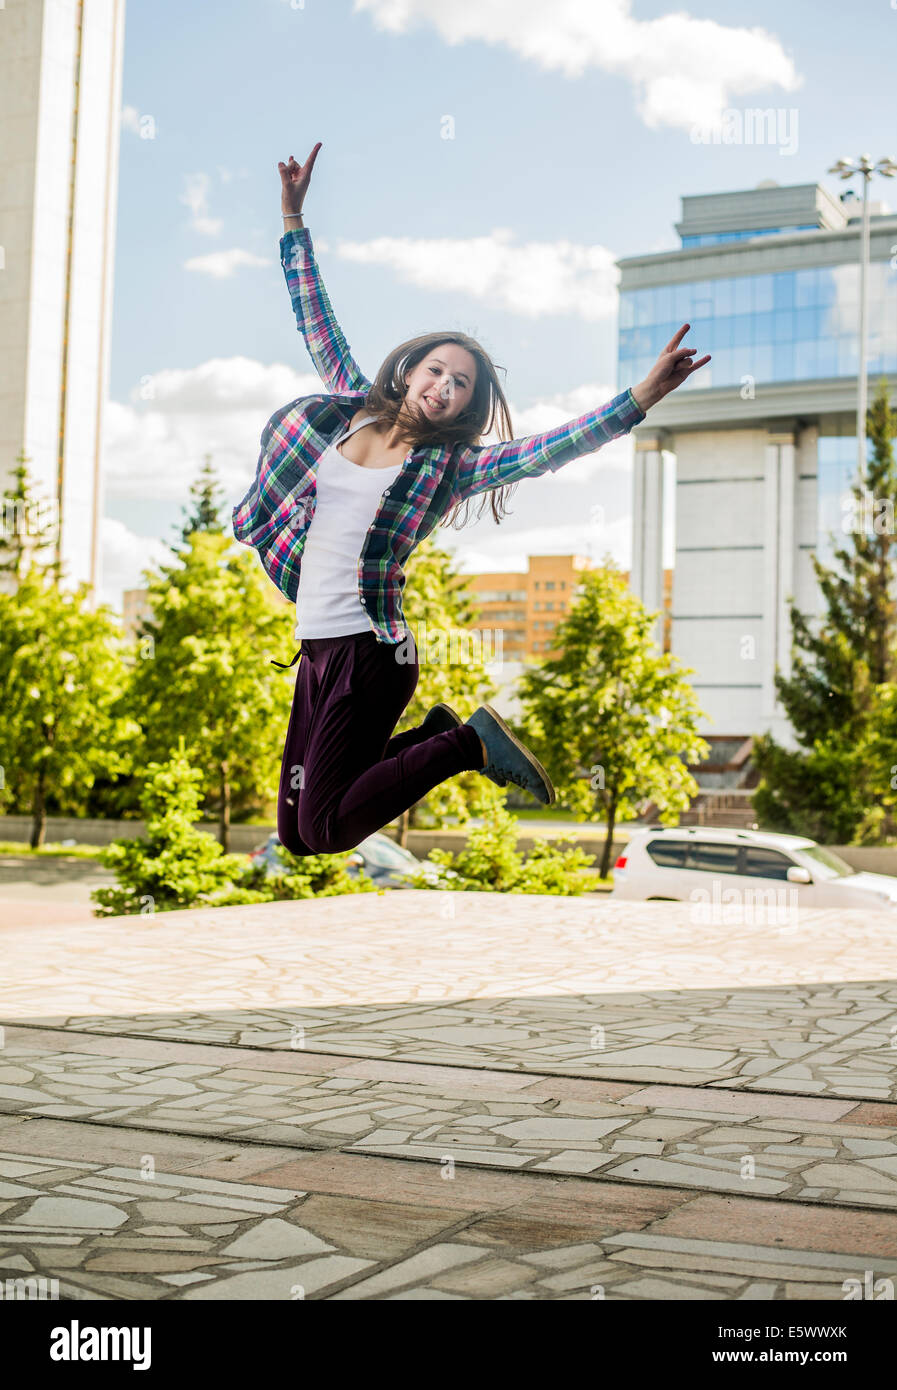 Young woman jumping mid air in city Stock Photo